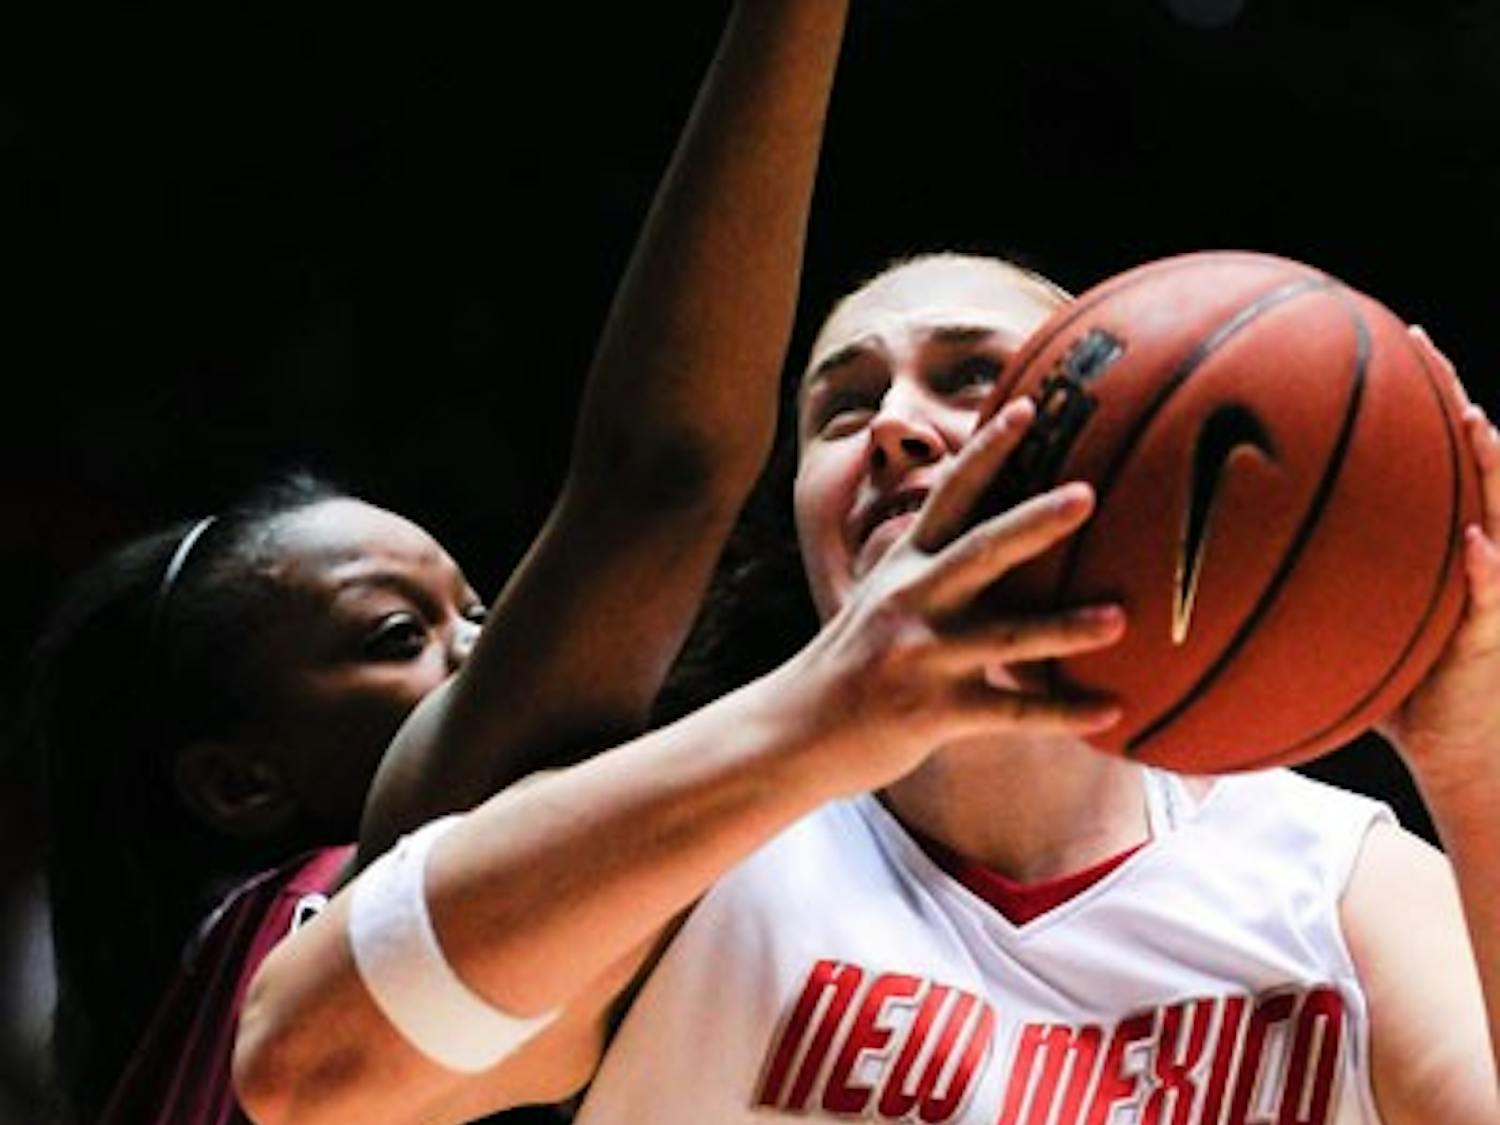 Valerie Kast led the Lobos to a blowout win Thursday, scoring 18 points and recording five blocks.